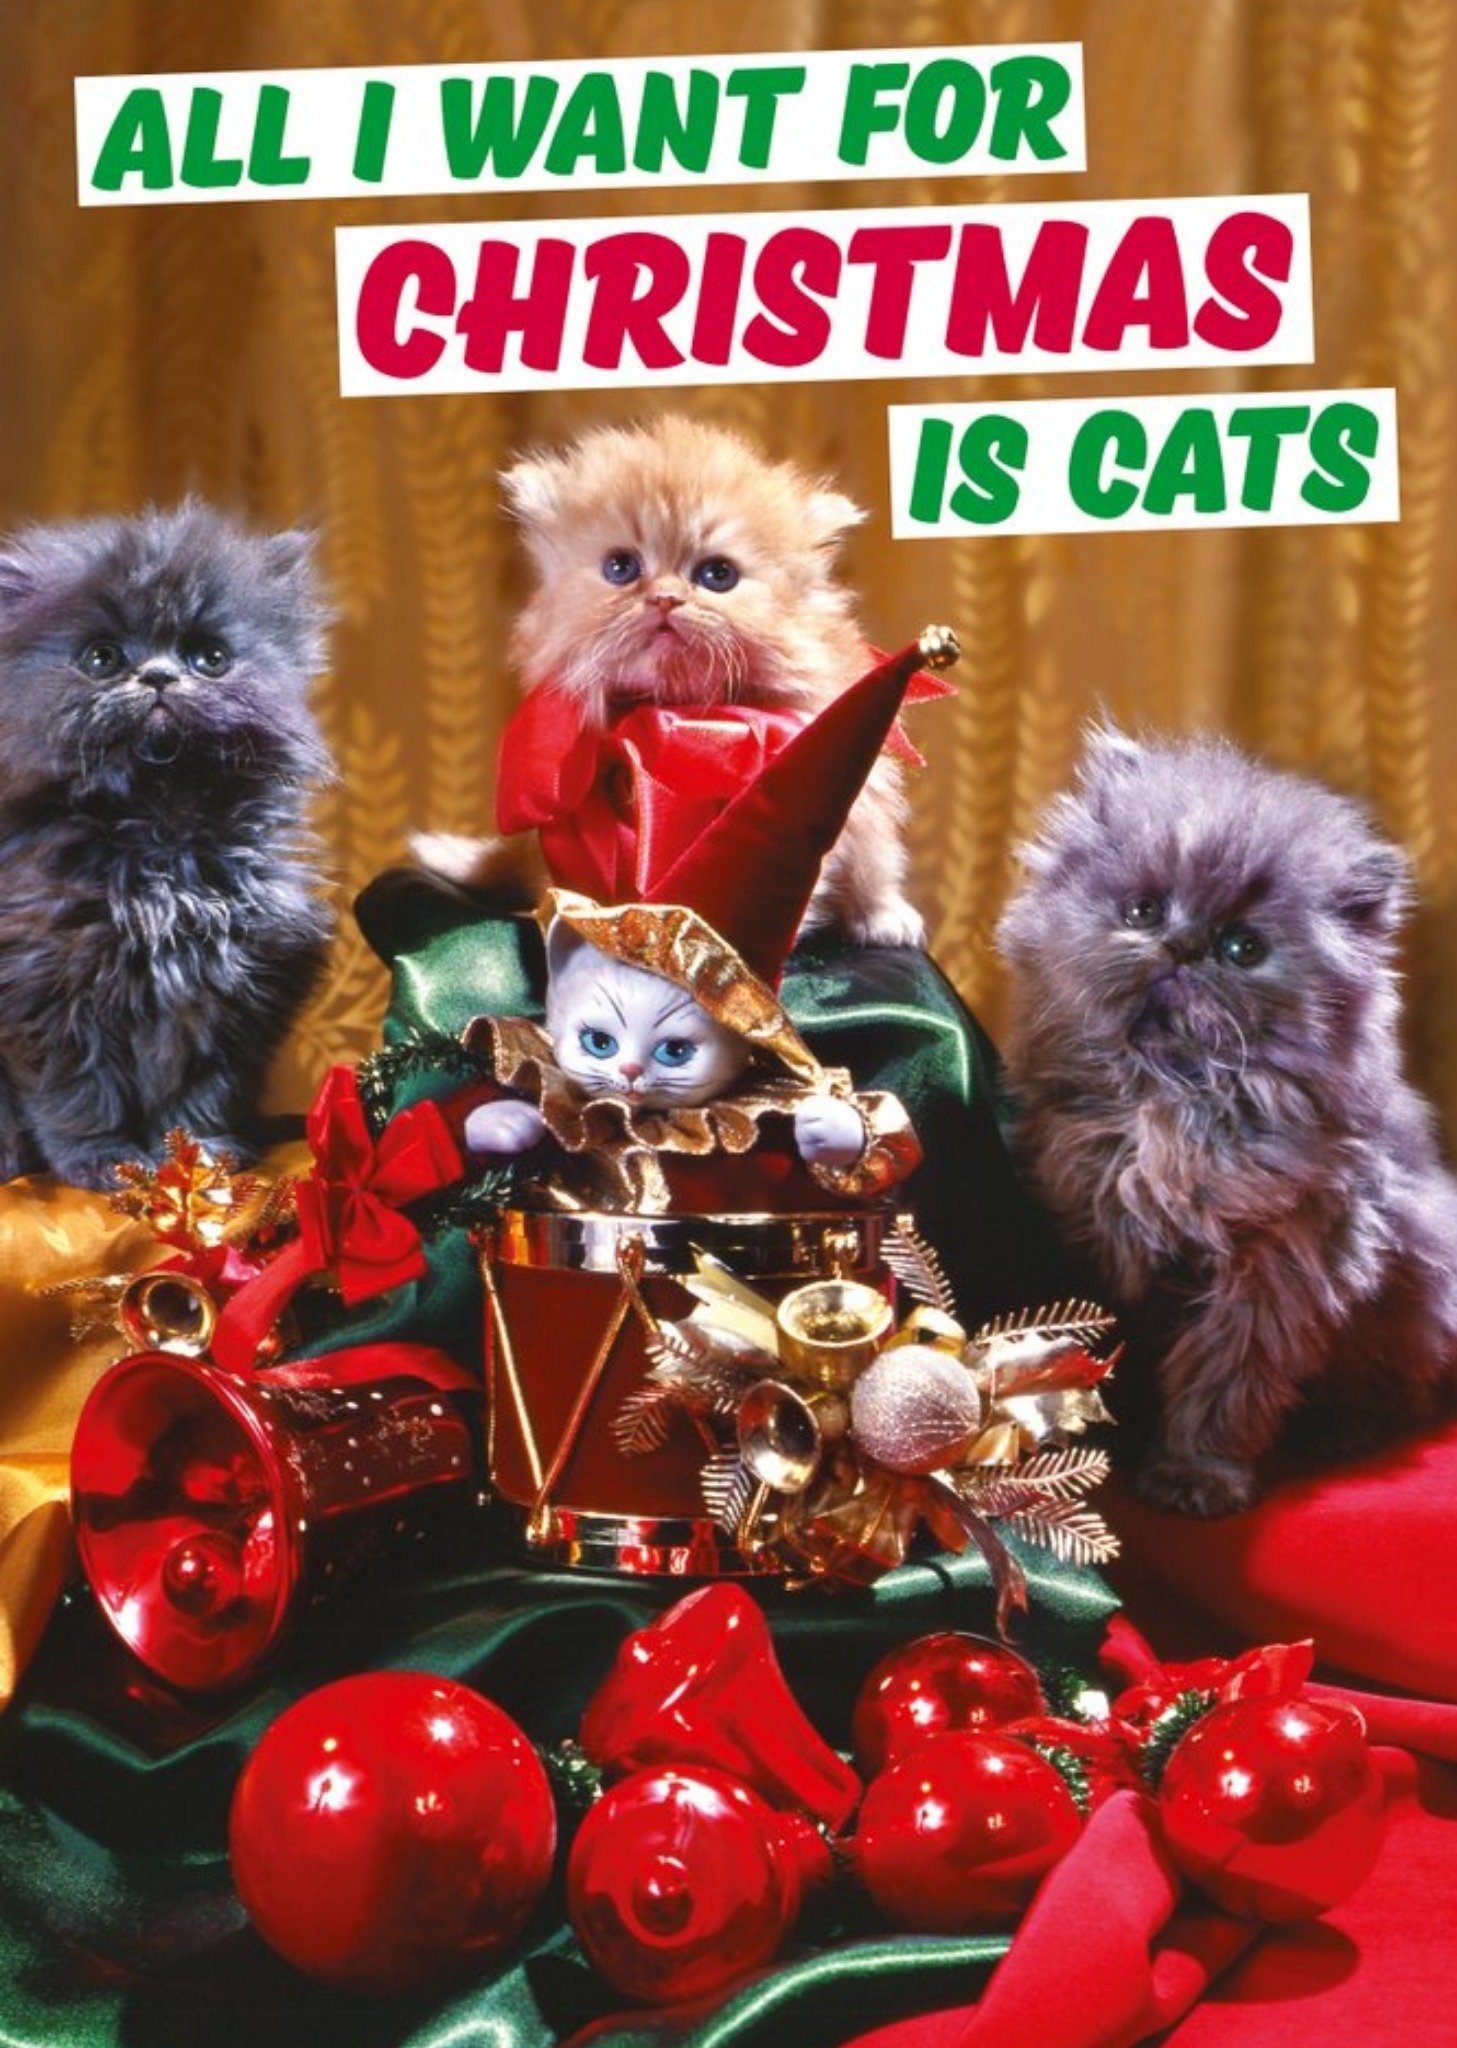 Moonpig Dean Morris All I Want For Christmas Is Cats Christmas Card, Large